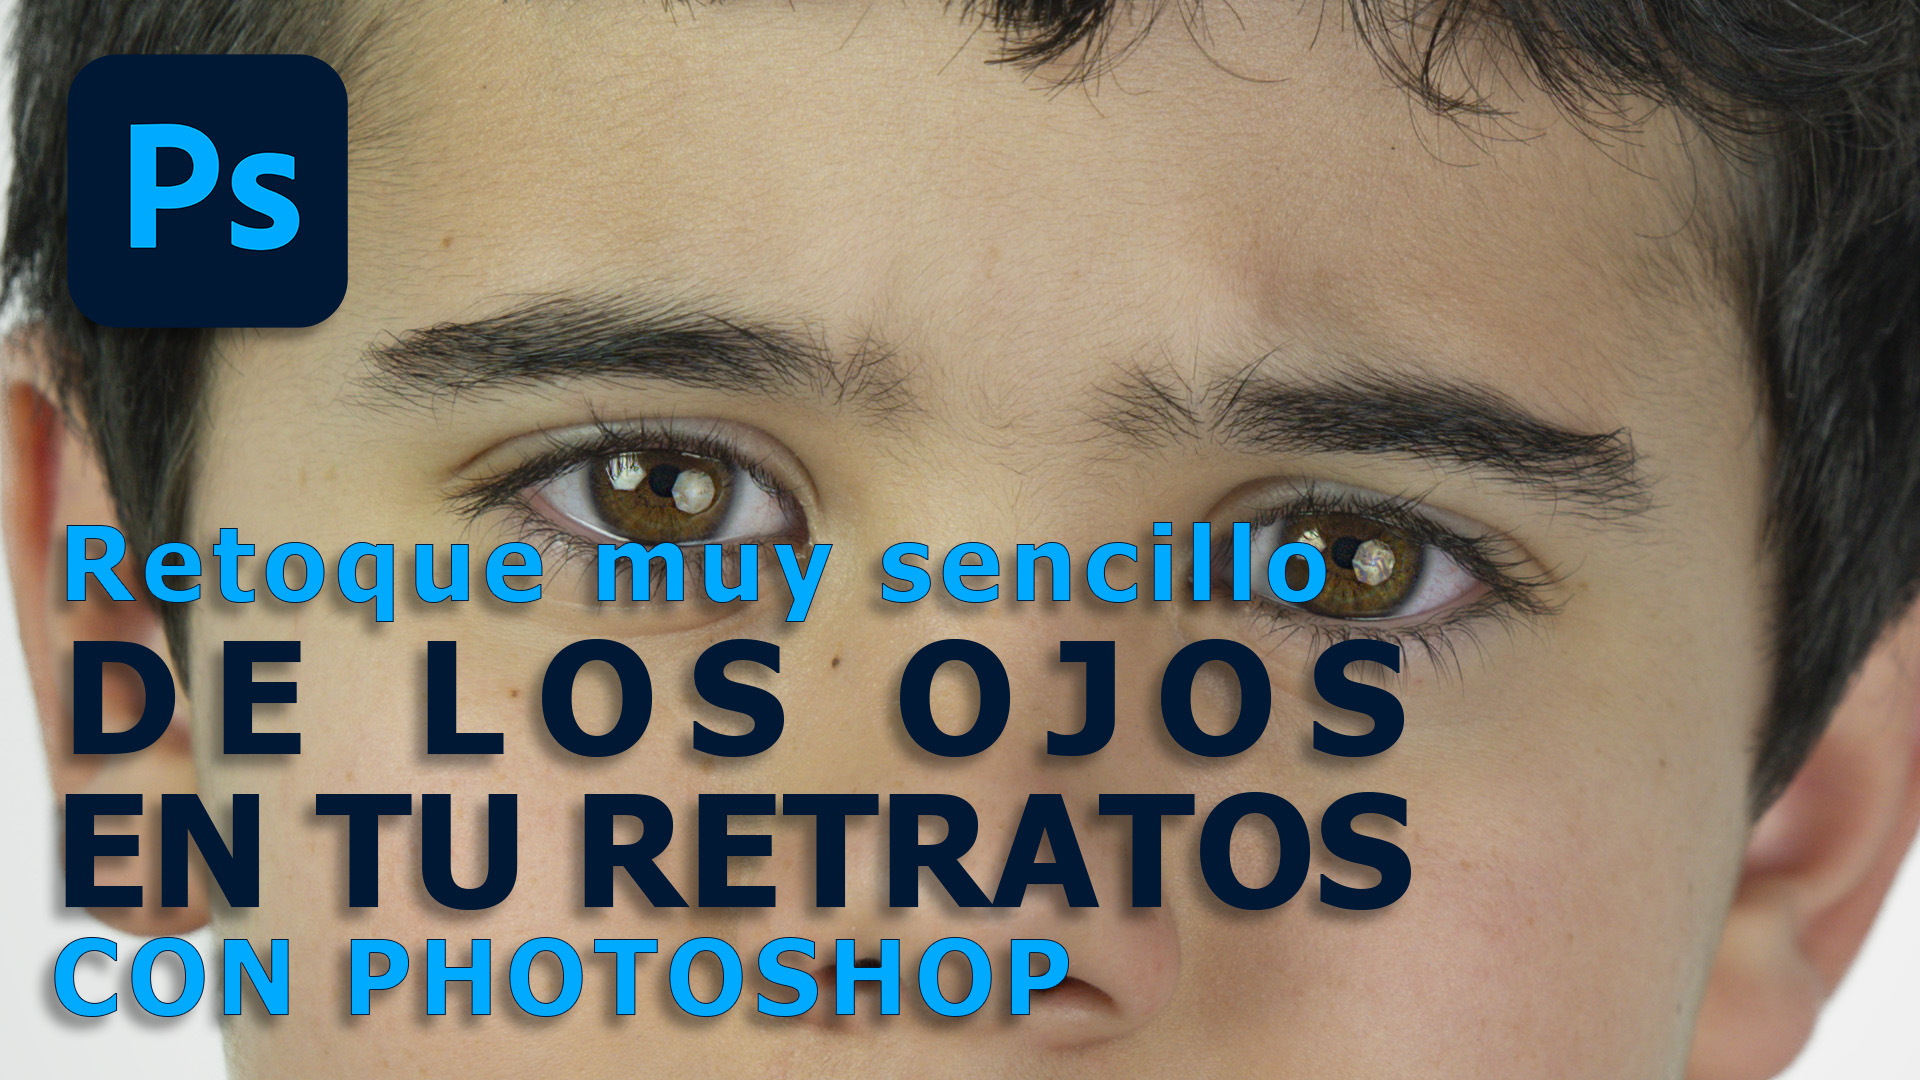 Improve the eyes of the models in your photos with Photoshop